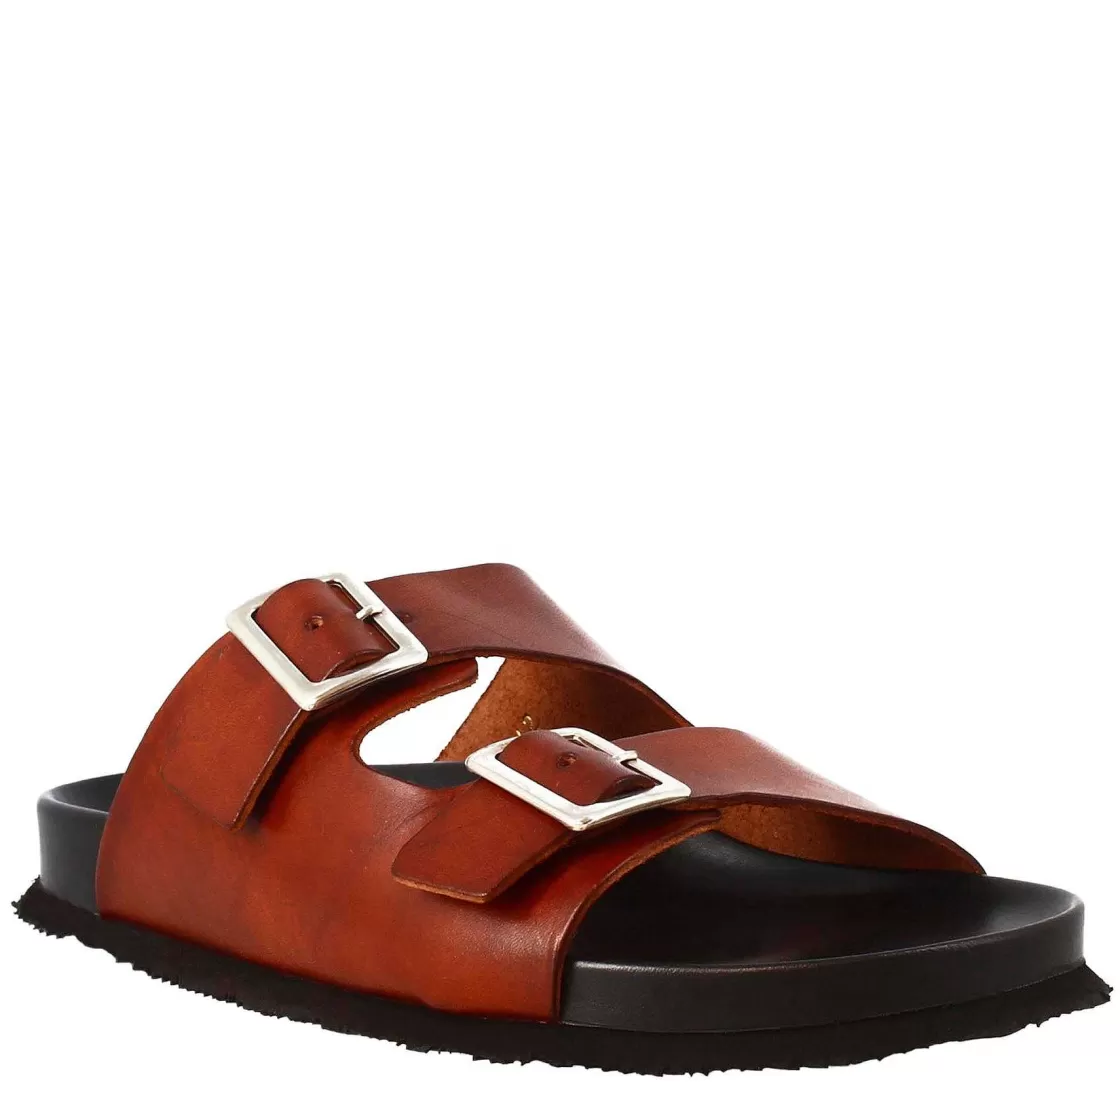 Leonardo Brown Double Buckle Sandals For Men In Leather Open On The Back New